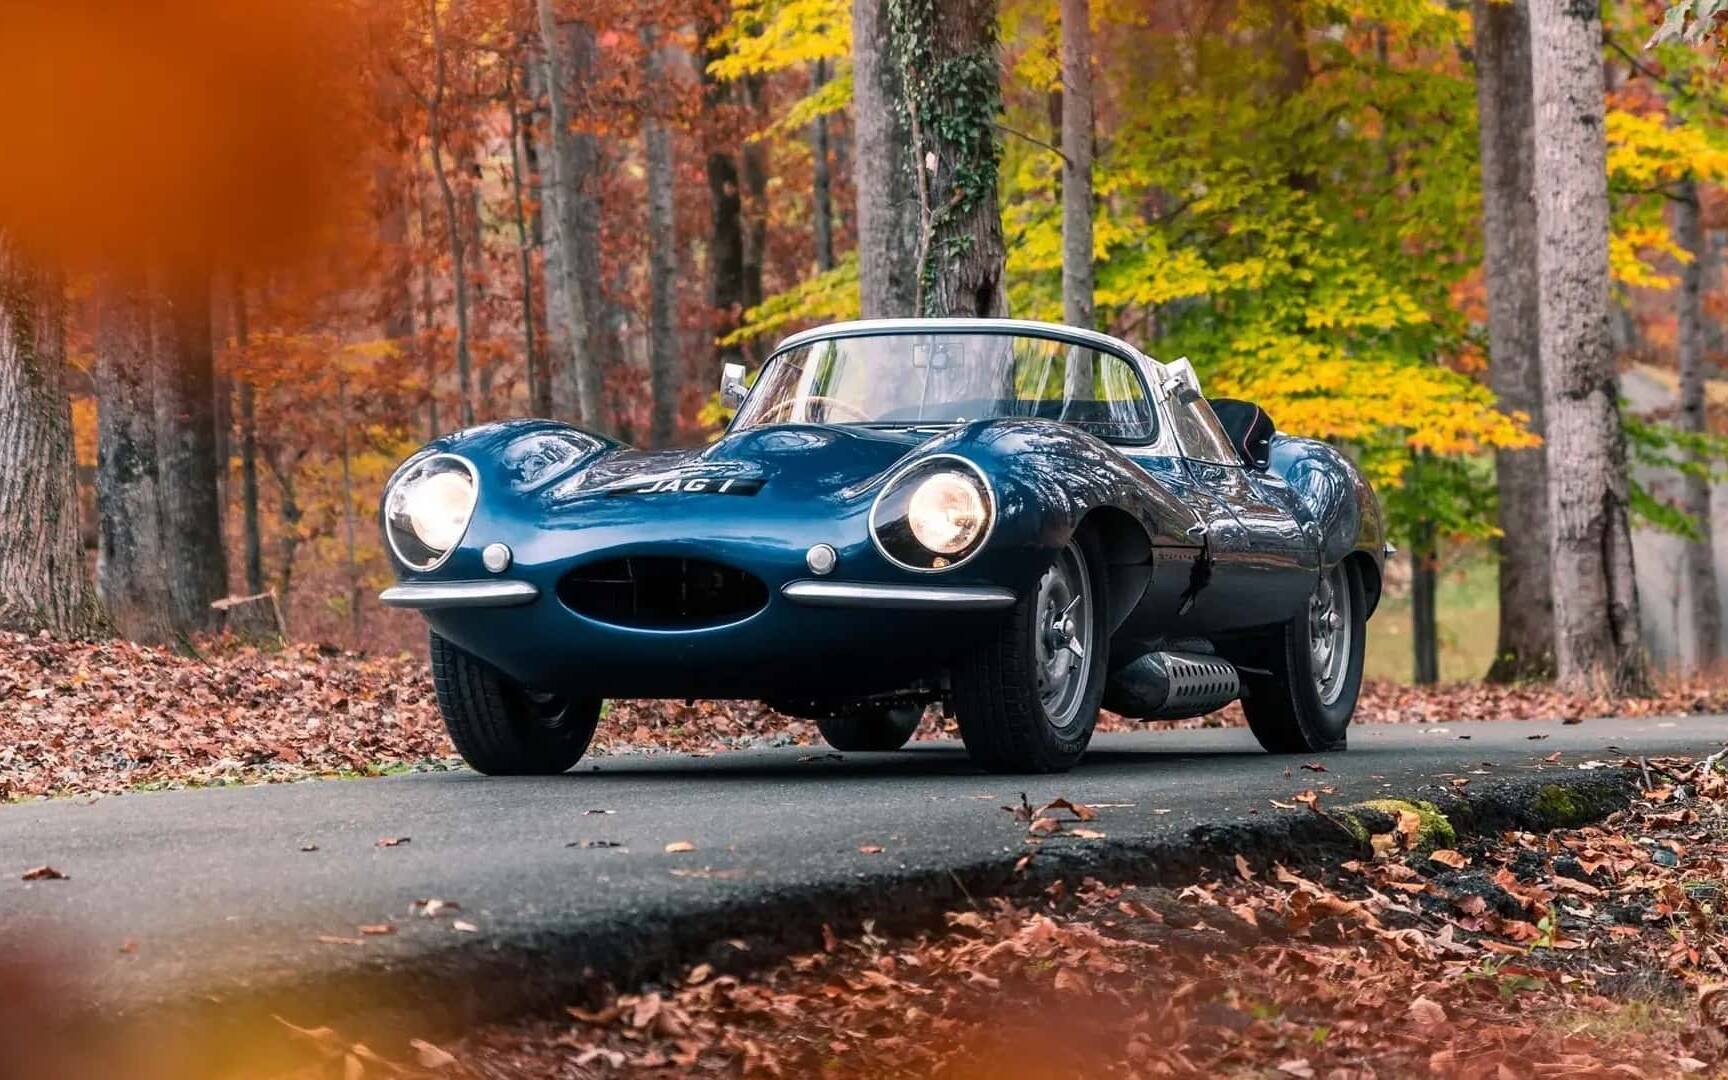 this auction-bound 1957 jaguar xkss may be worth over $18m